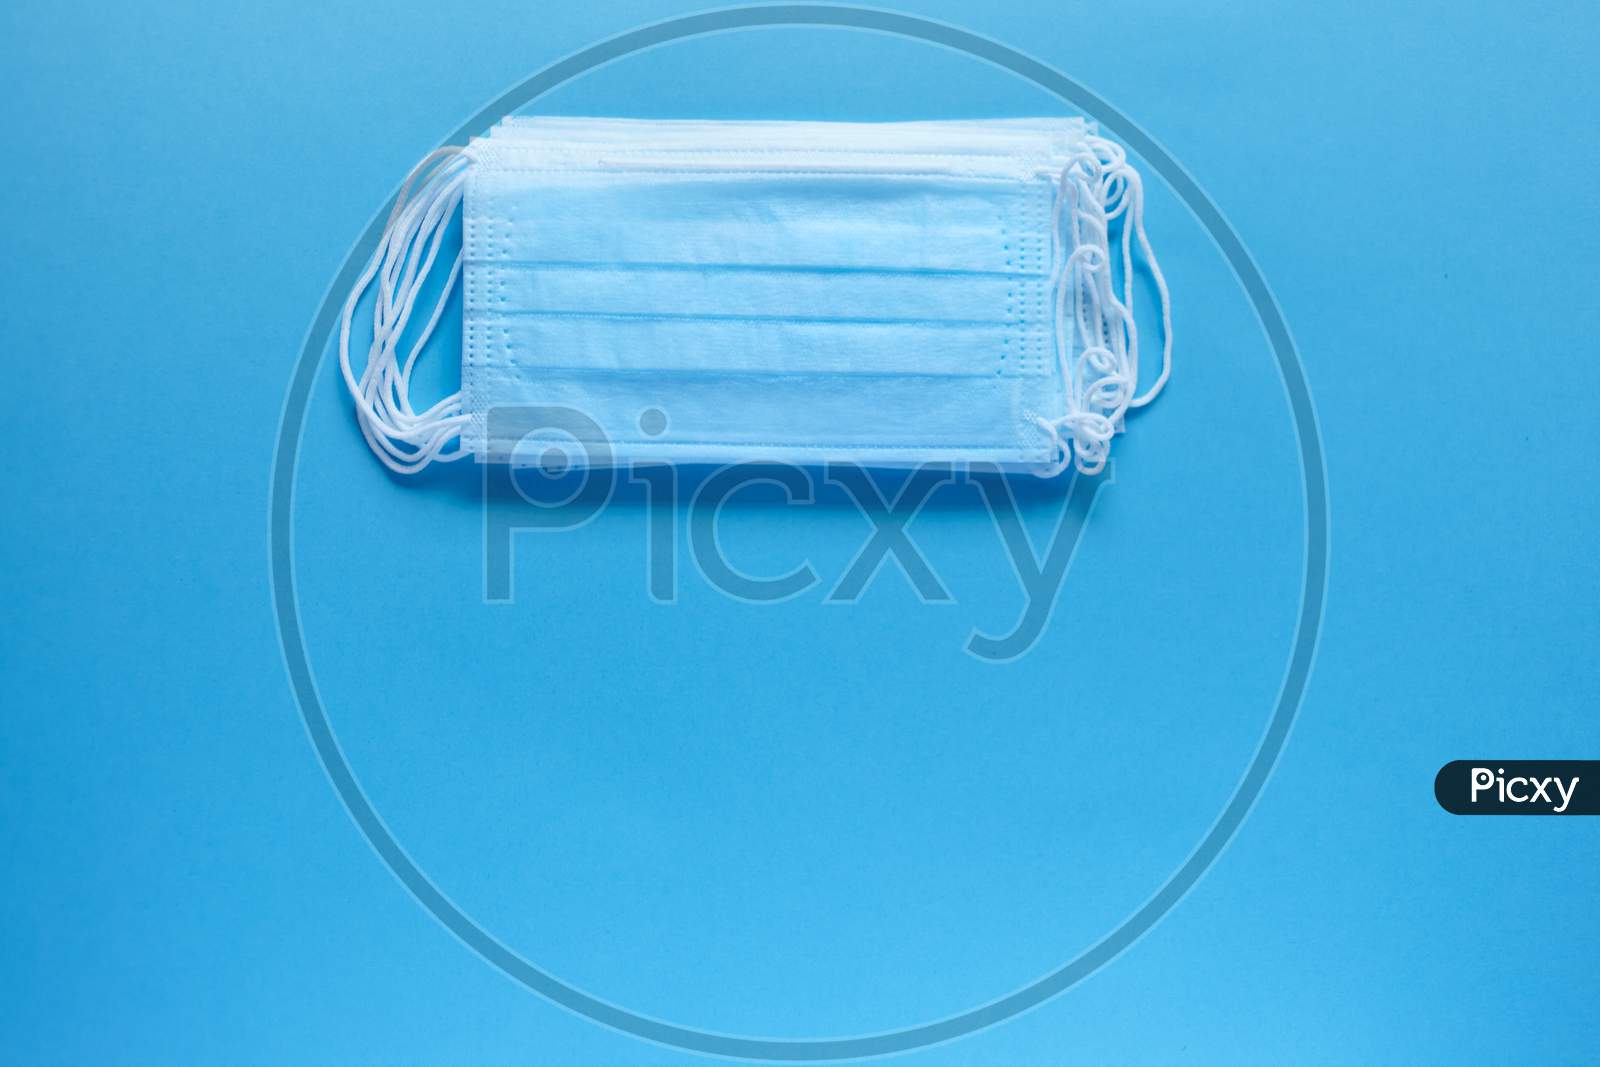 Prevent Coronavirus. Medical Protective Masks Isolated On Blue Background. Disposable Surgical Face Mask Cover Mouth And Nose. Healthcare Medical Coronavirus Quarantine. Hygiene Concept